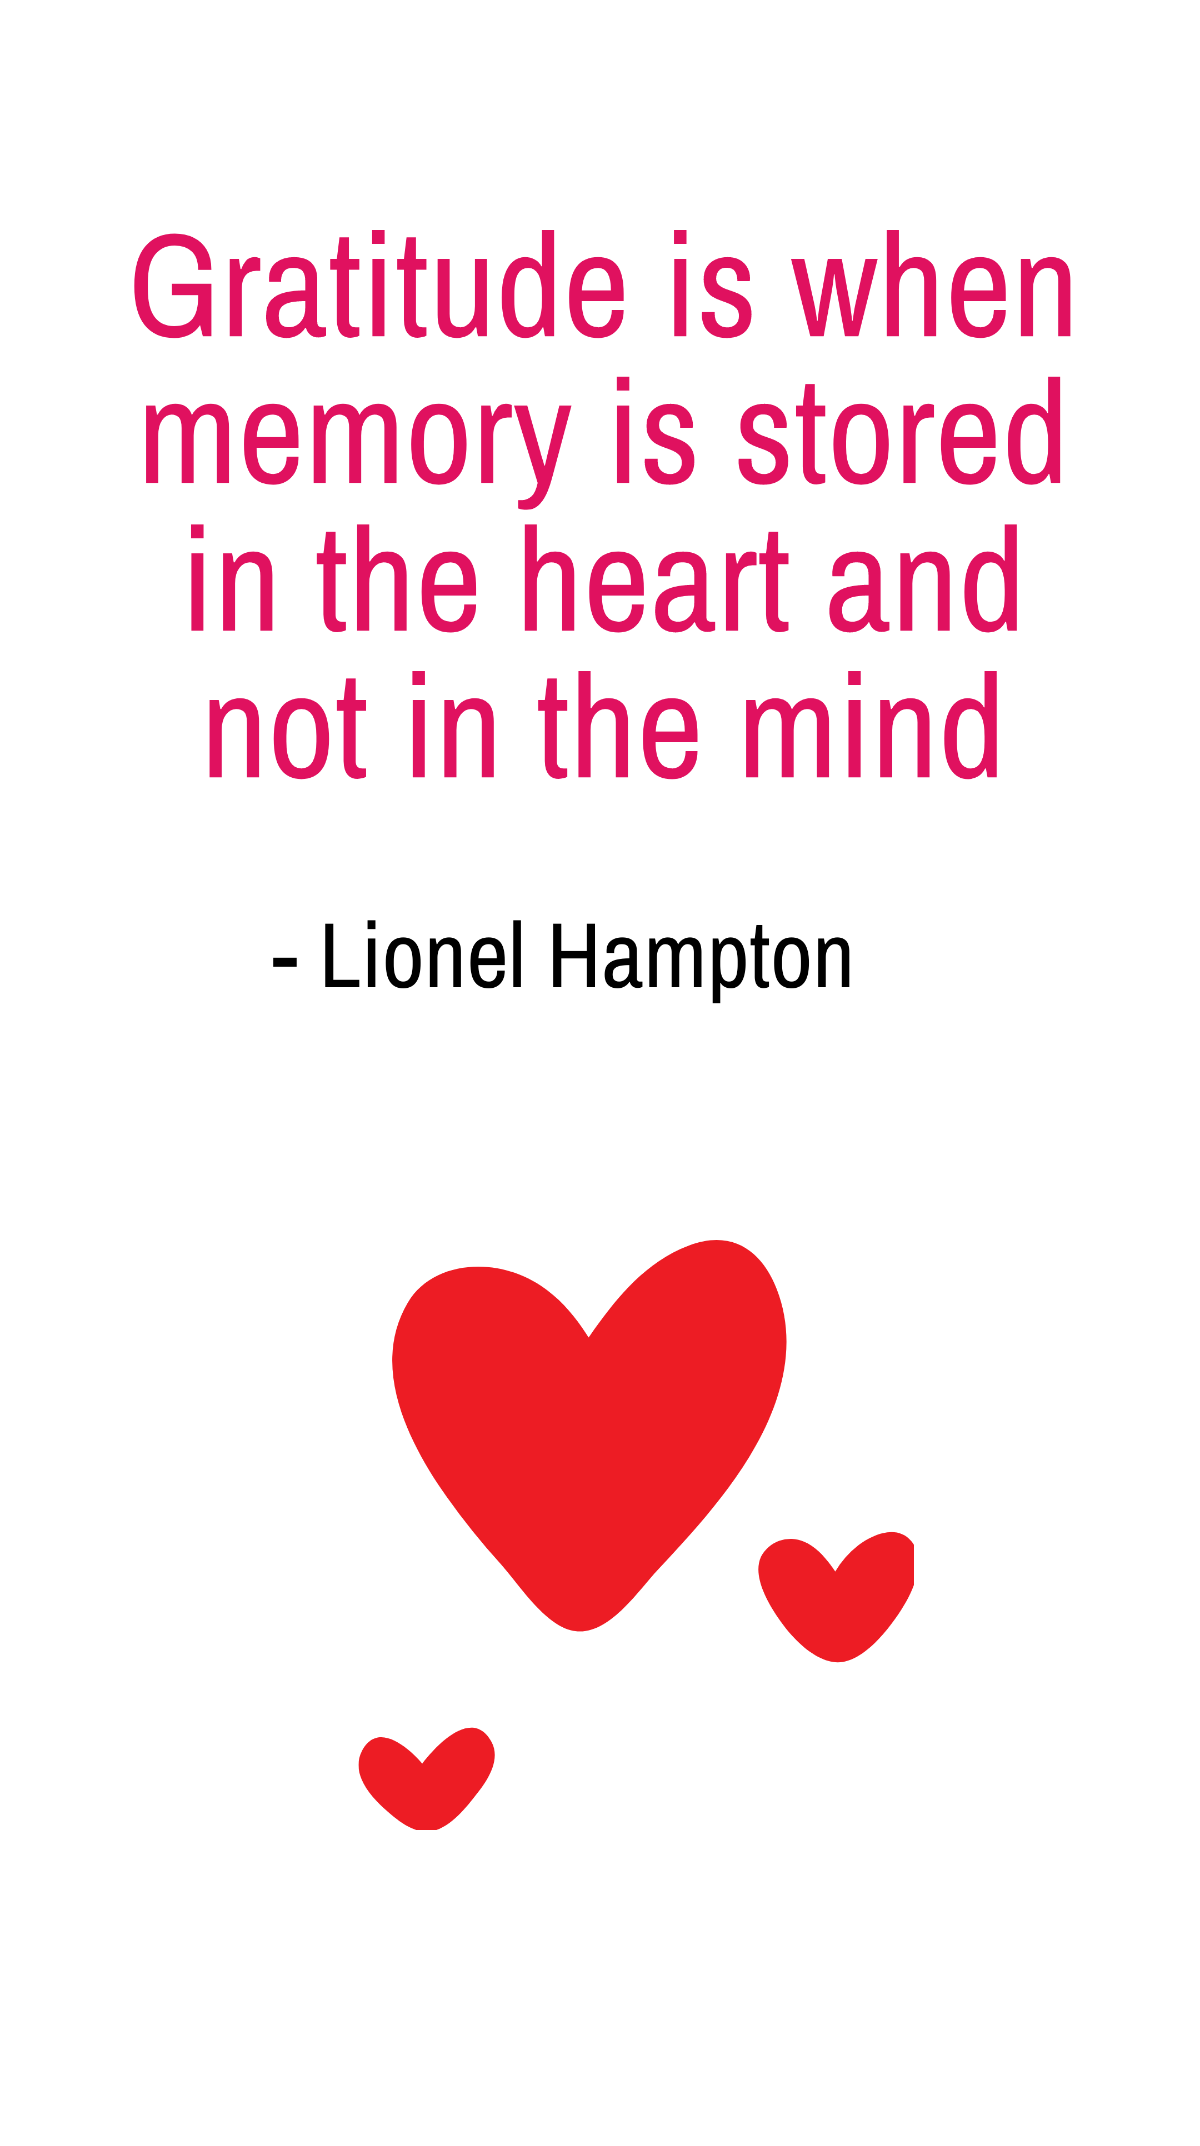 Lionel Hampton - Gratitude is when memory is stored in the heart and not in the mind